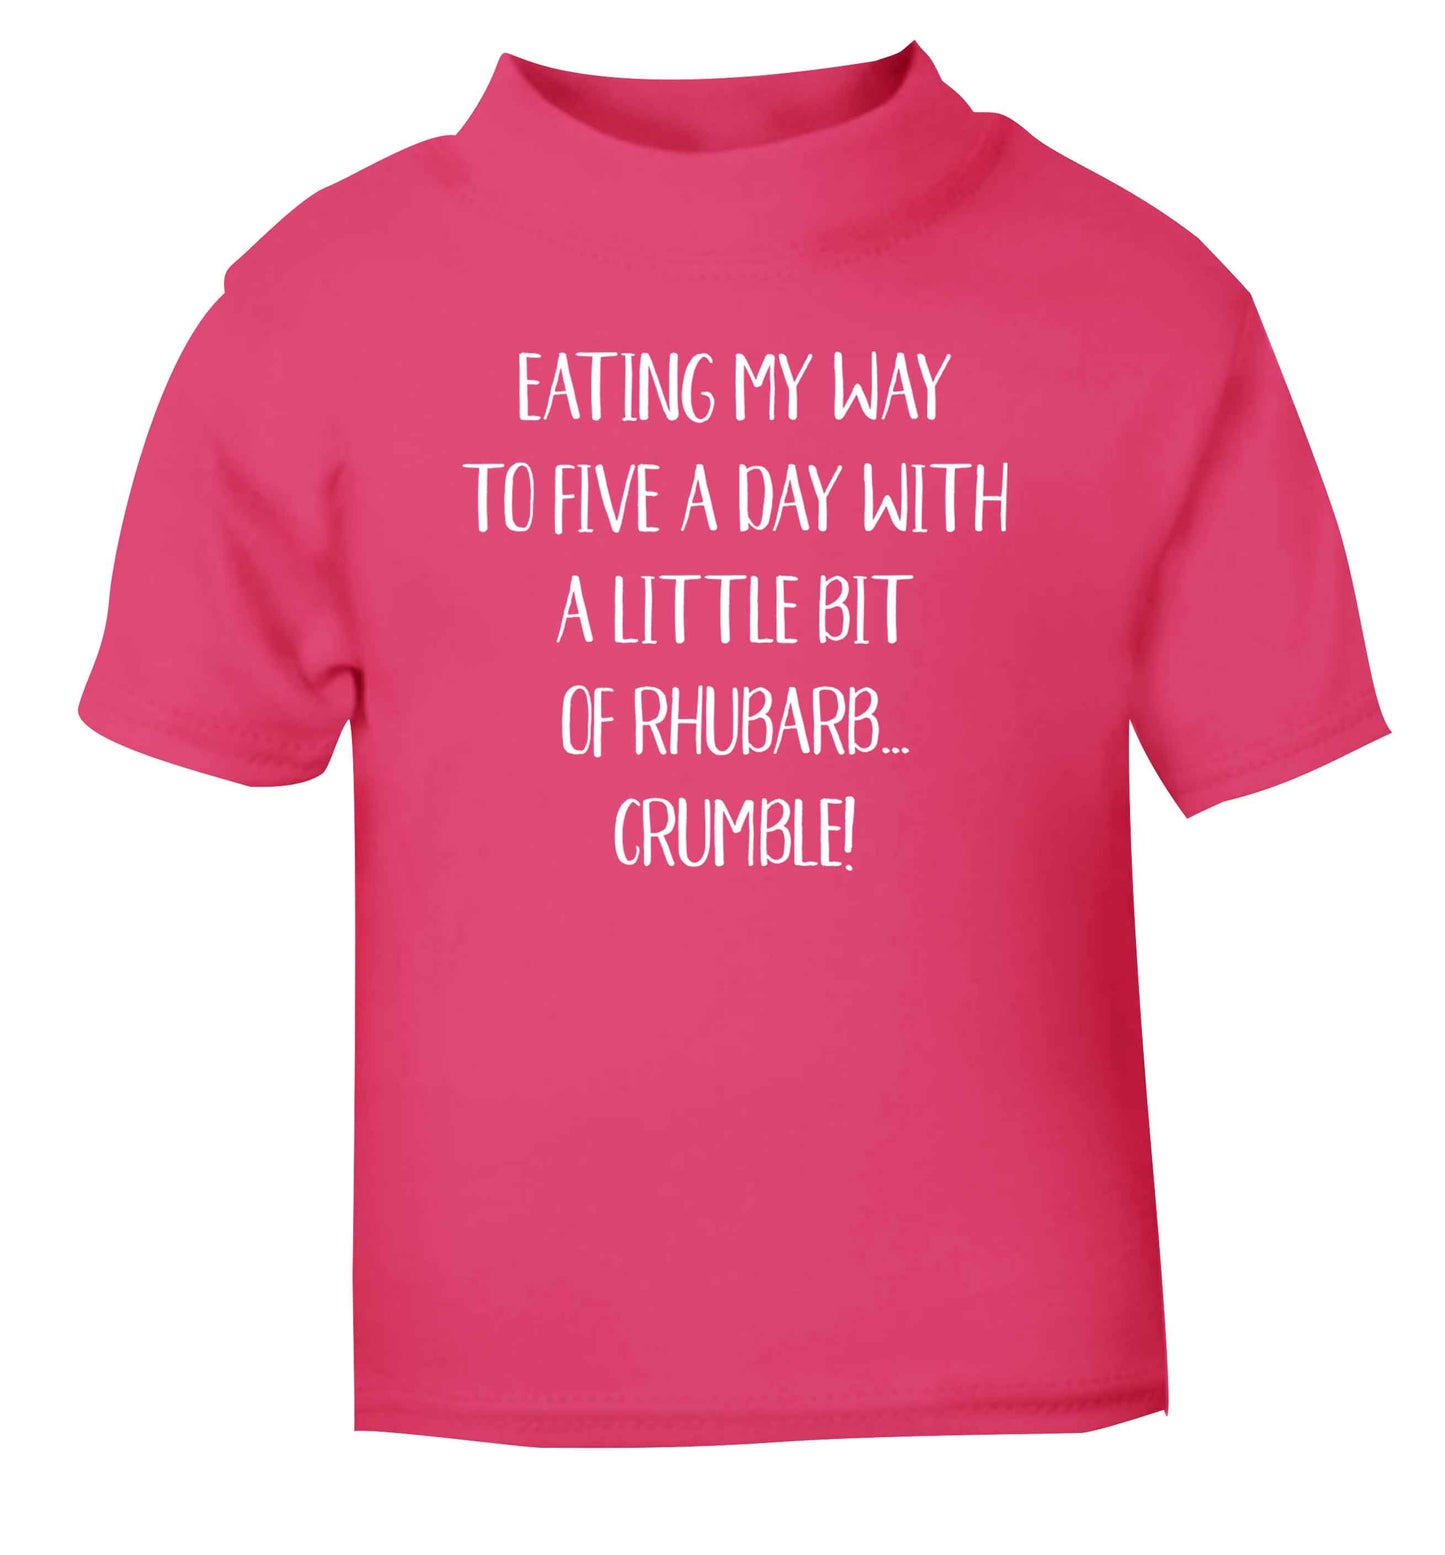 Eating my way to five a day with a little bit of rhubarb crumble pink Baby Toddler Tshirt 2 Years